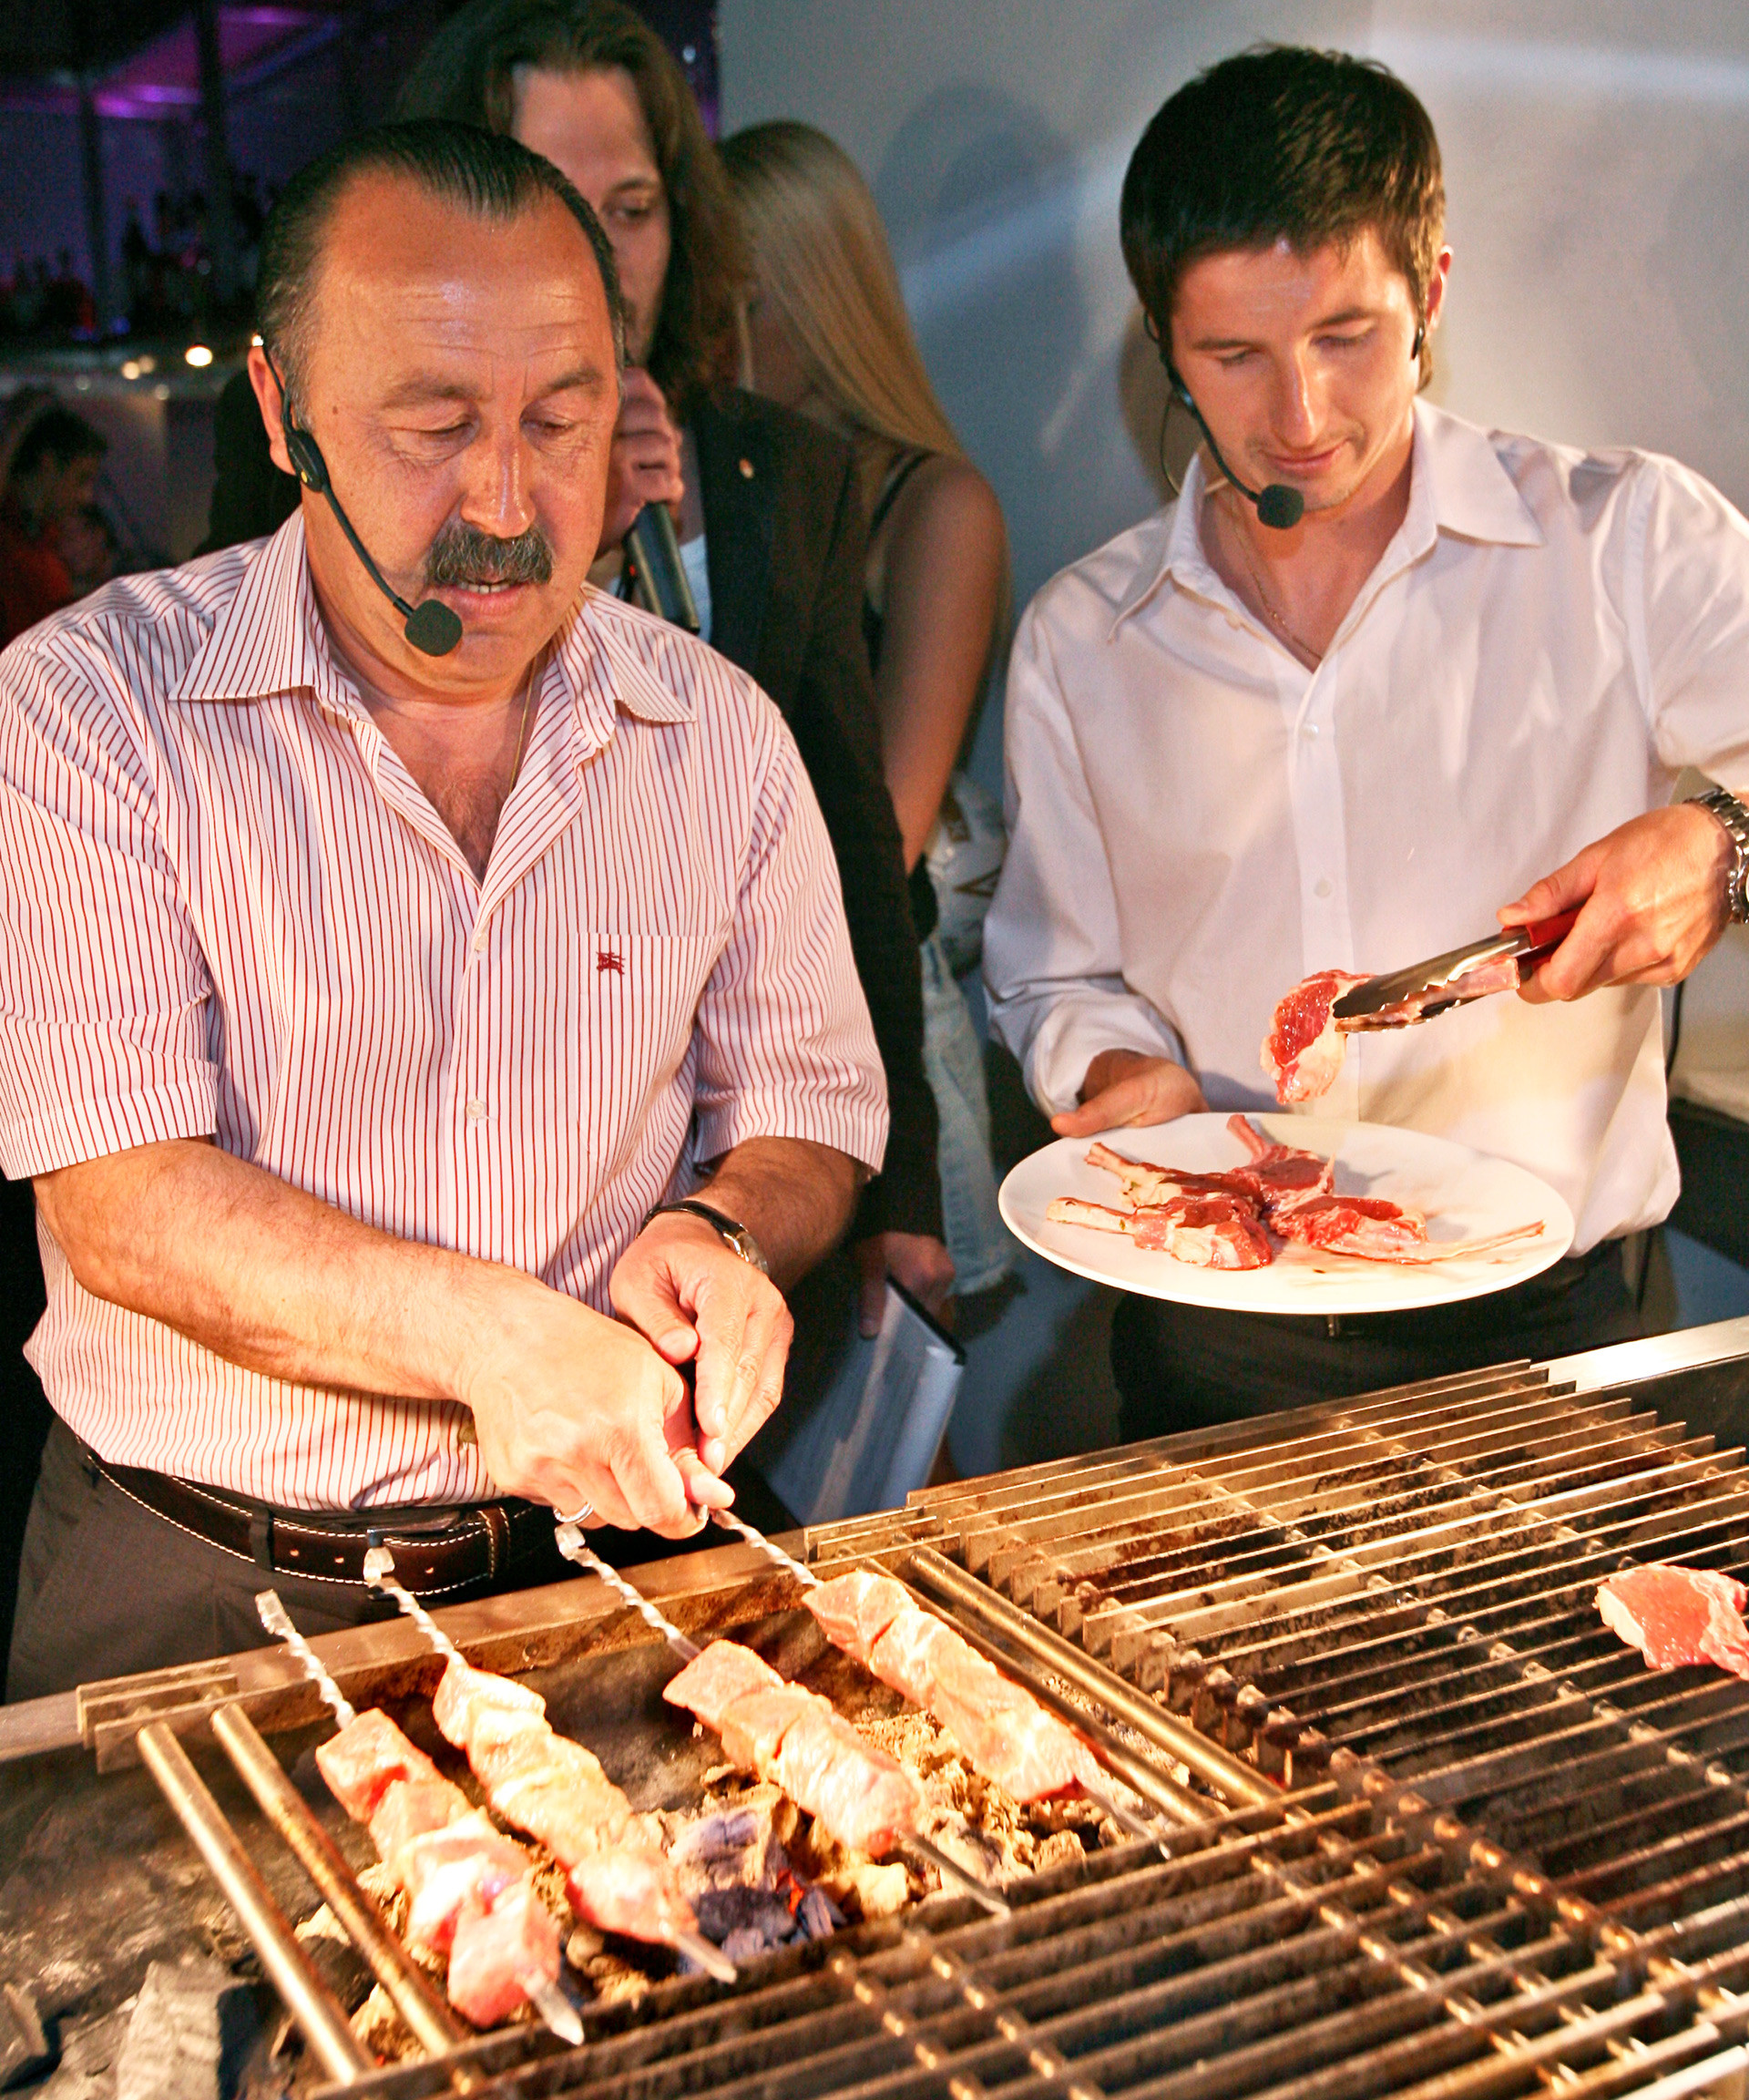 CSKA head coach and midfielder cook grilled meat in the Moscow restaurant.